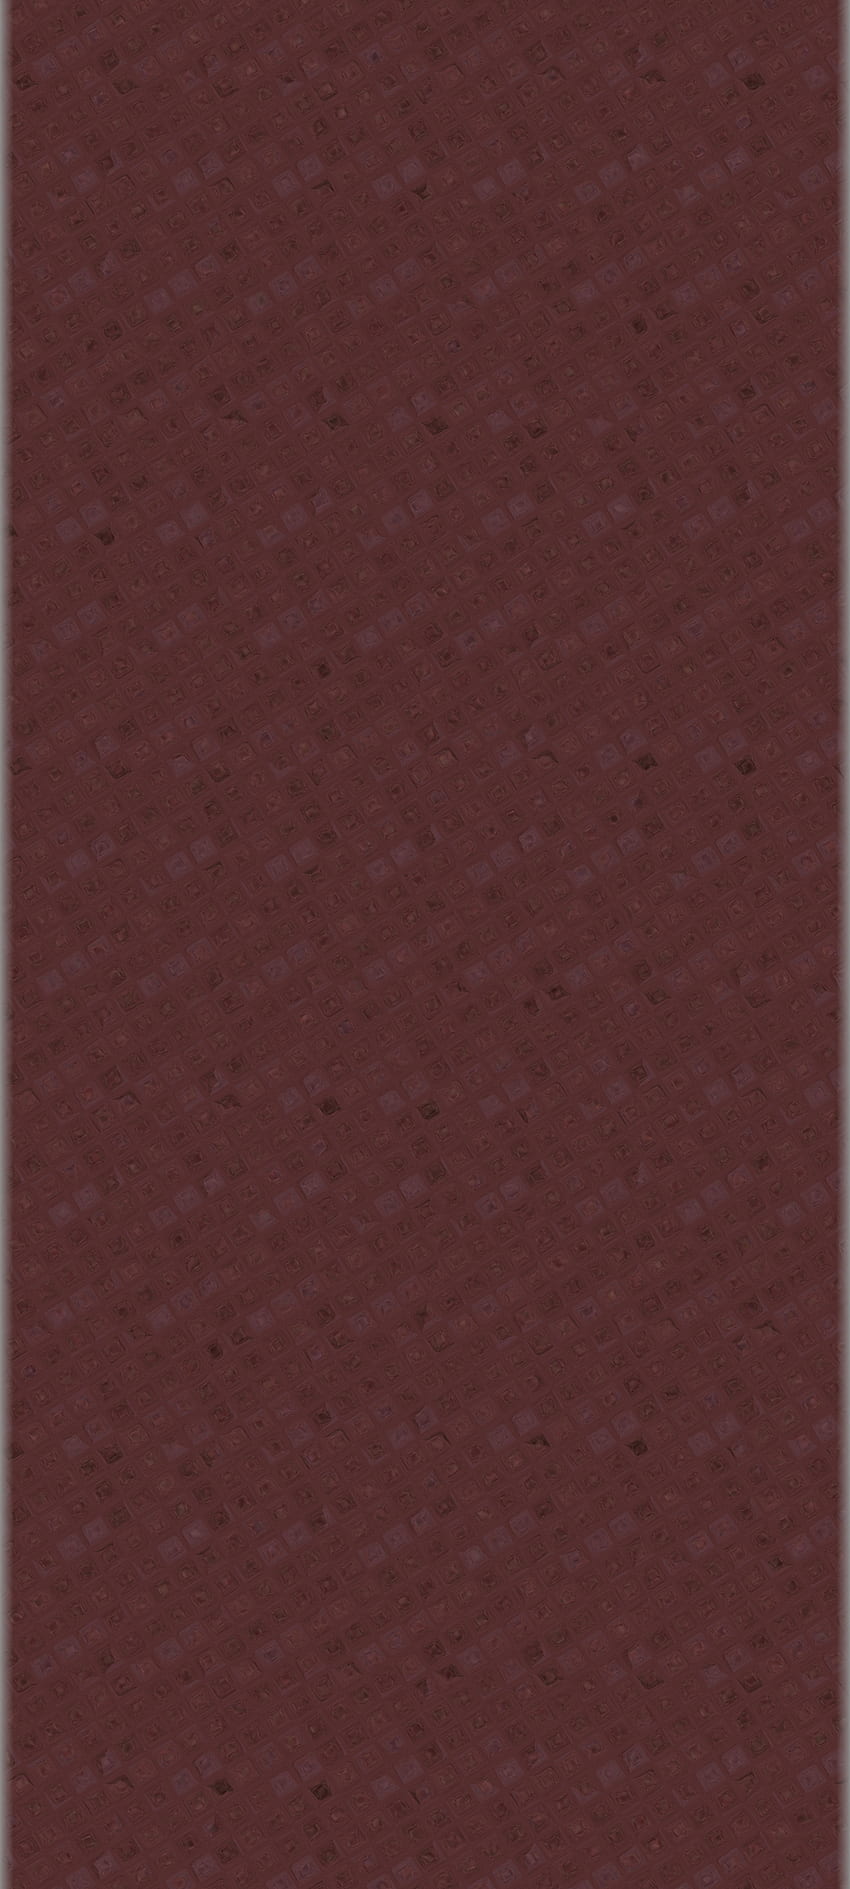 No1-Home Screen, iPhone, Basic, Galaxy, New, Art, iPhone 13, pattern, Cool, Modern, Surface, , design, Smooth, locked, A51, soft, Background, Galaxy S21, Druffix, 2021, brown, M32, Magma, Android, Acer, No1, Apple, Colors, S10, Galaxy A32, Love, Home Screen, LG, Samsung, Edge, Nokia, Original, Smartphone HD phone wallpaper